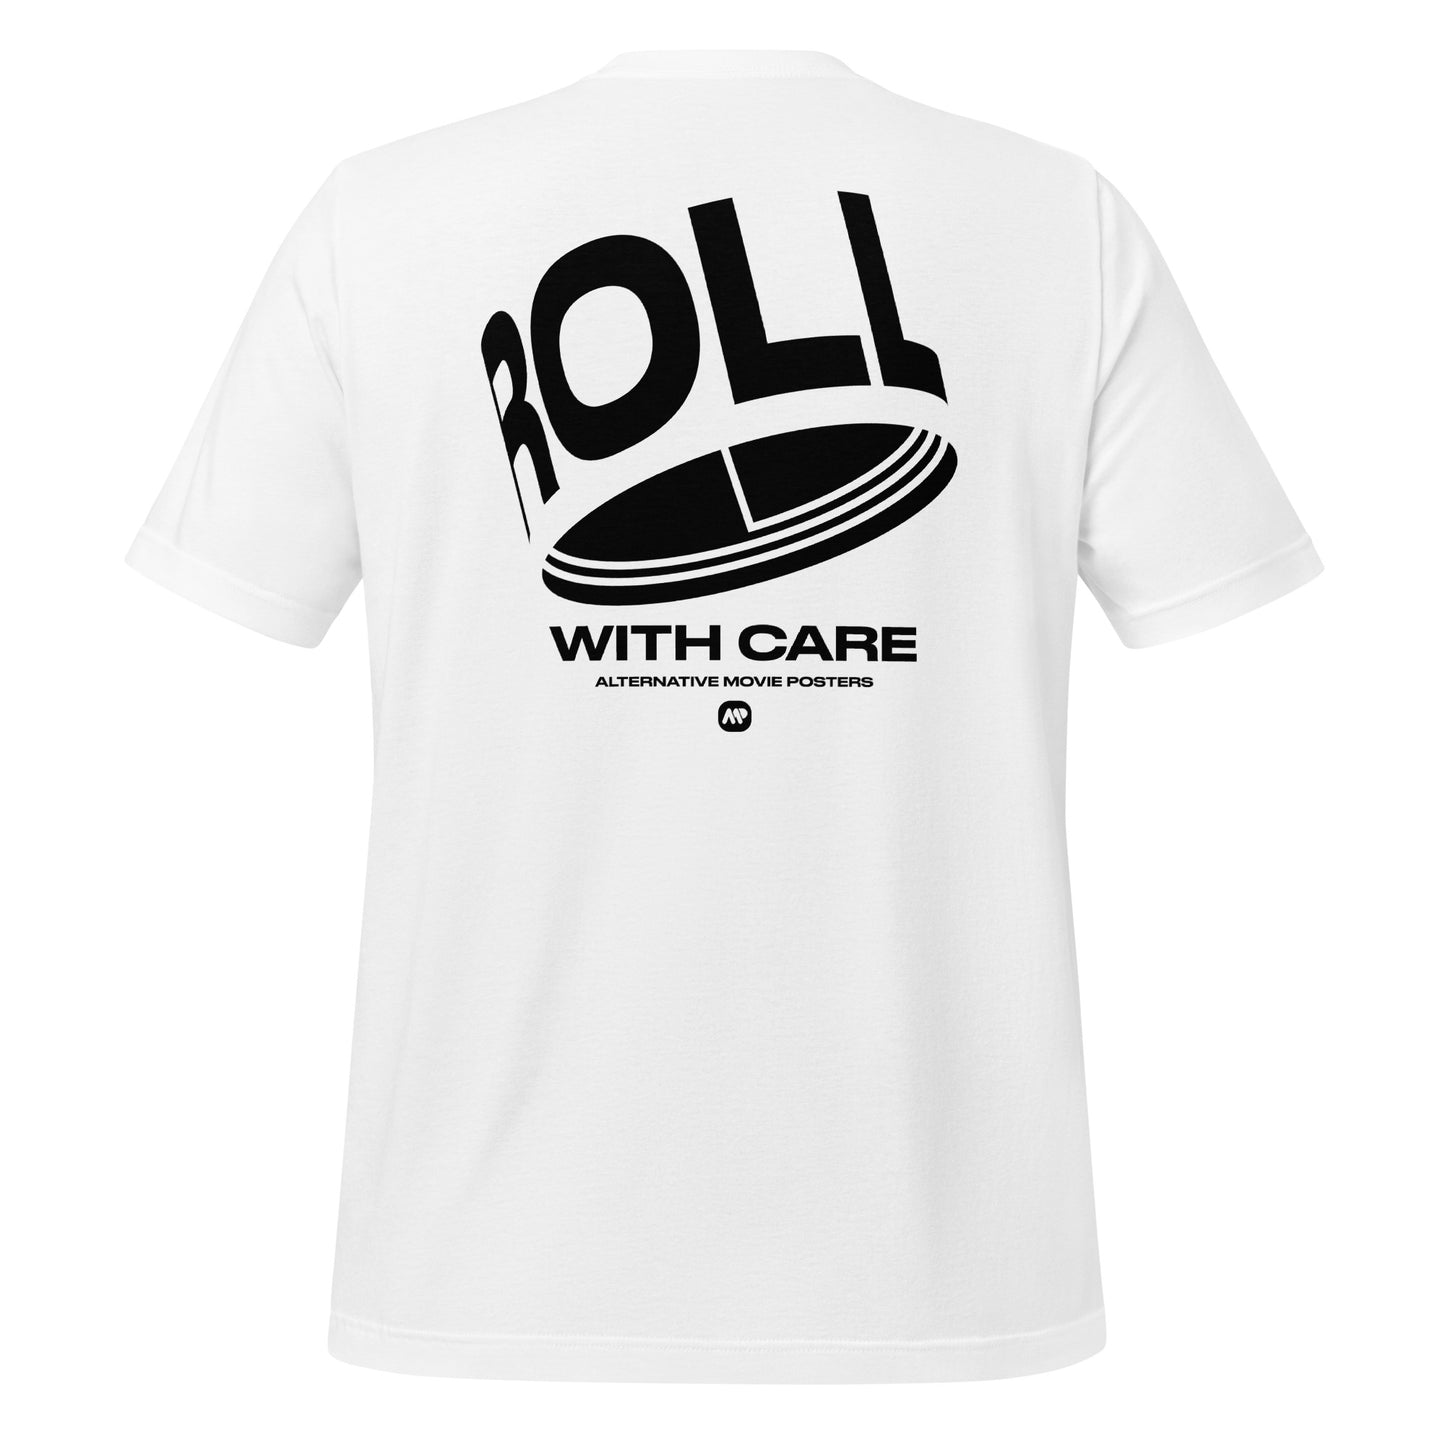 Roll With Care (Variant) T-Shirt